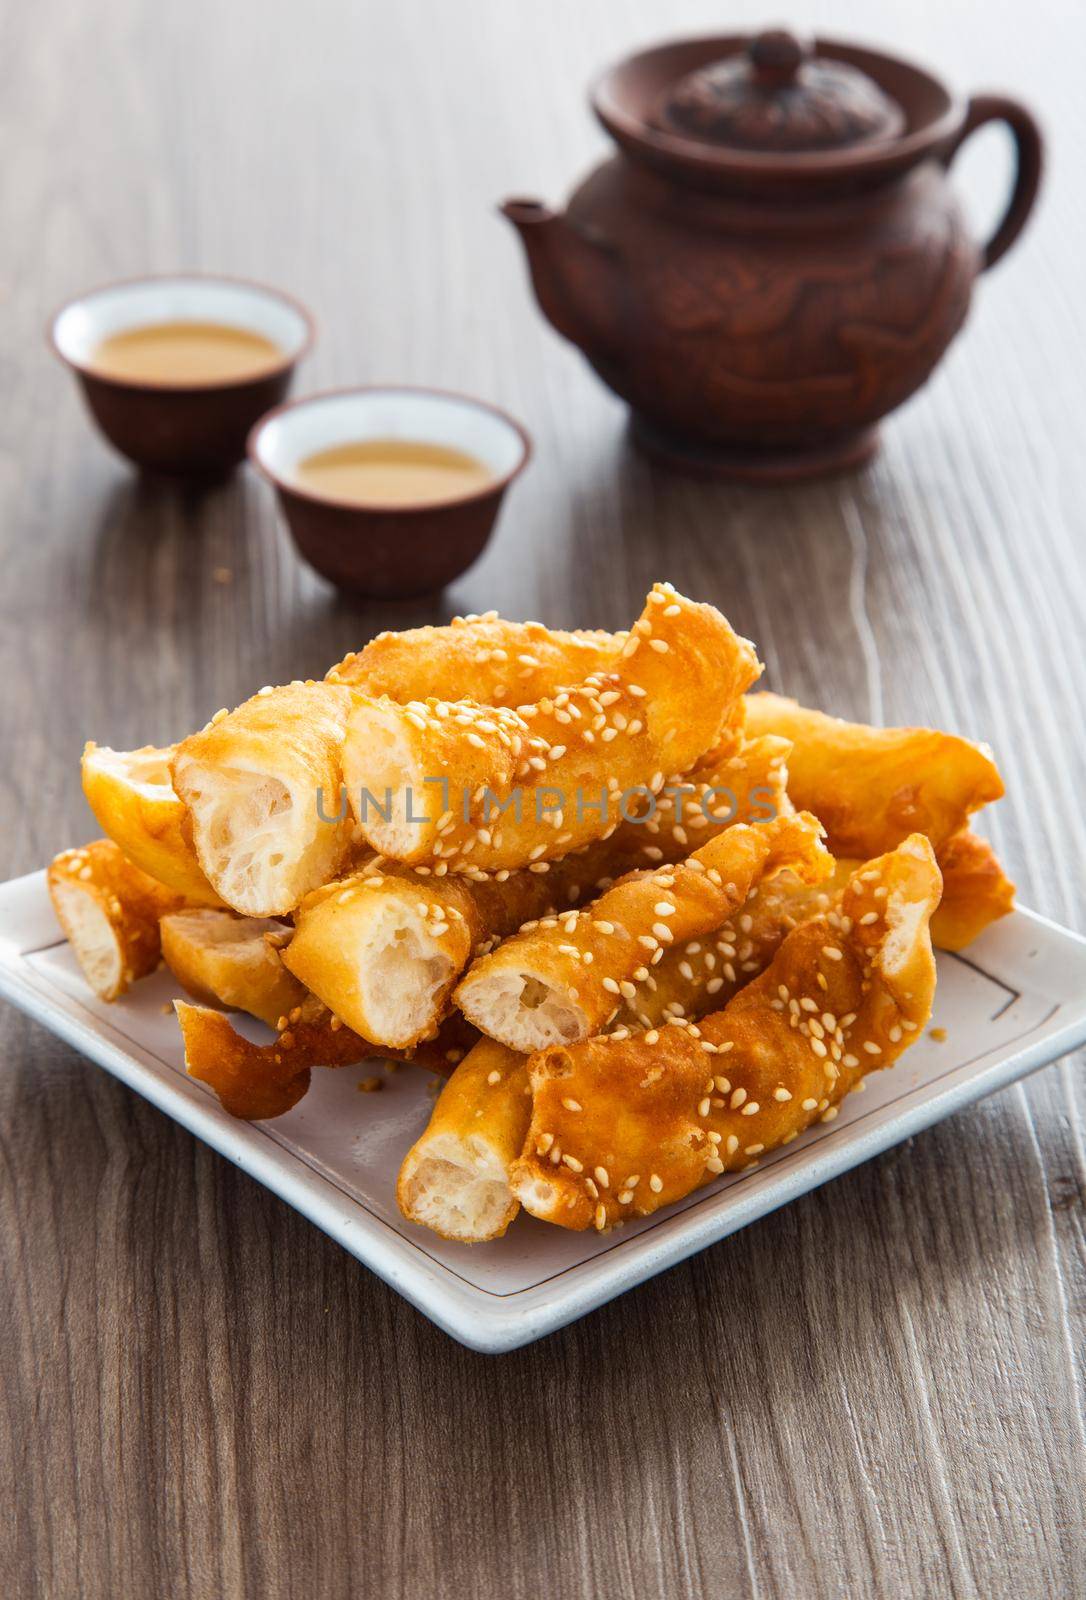 Horse Shoe Fritters, also known as Ma Geok or Butterfly, a popular fried food among Chinese